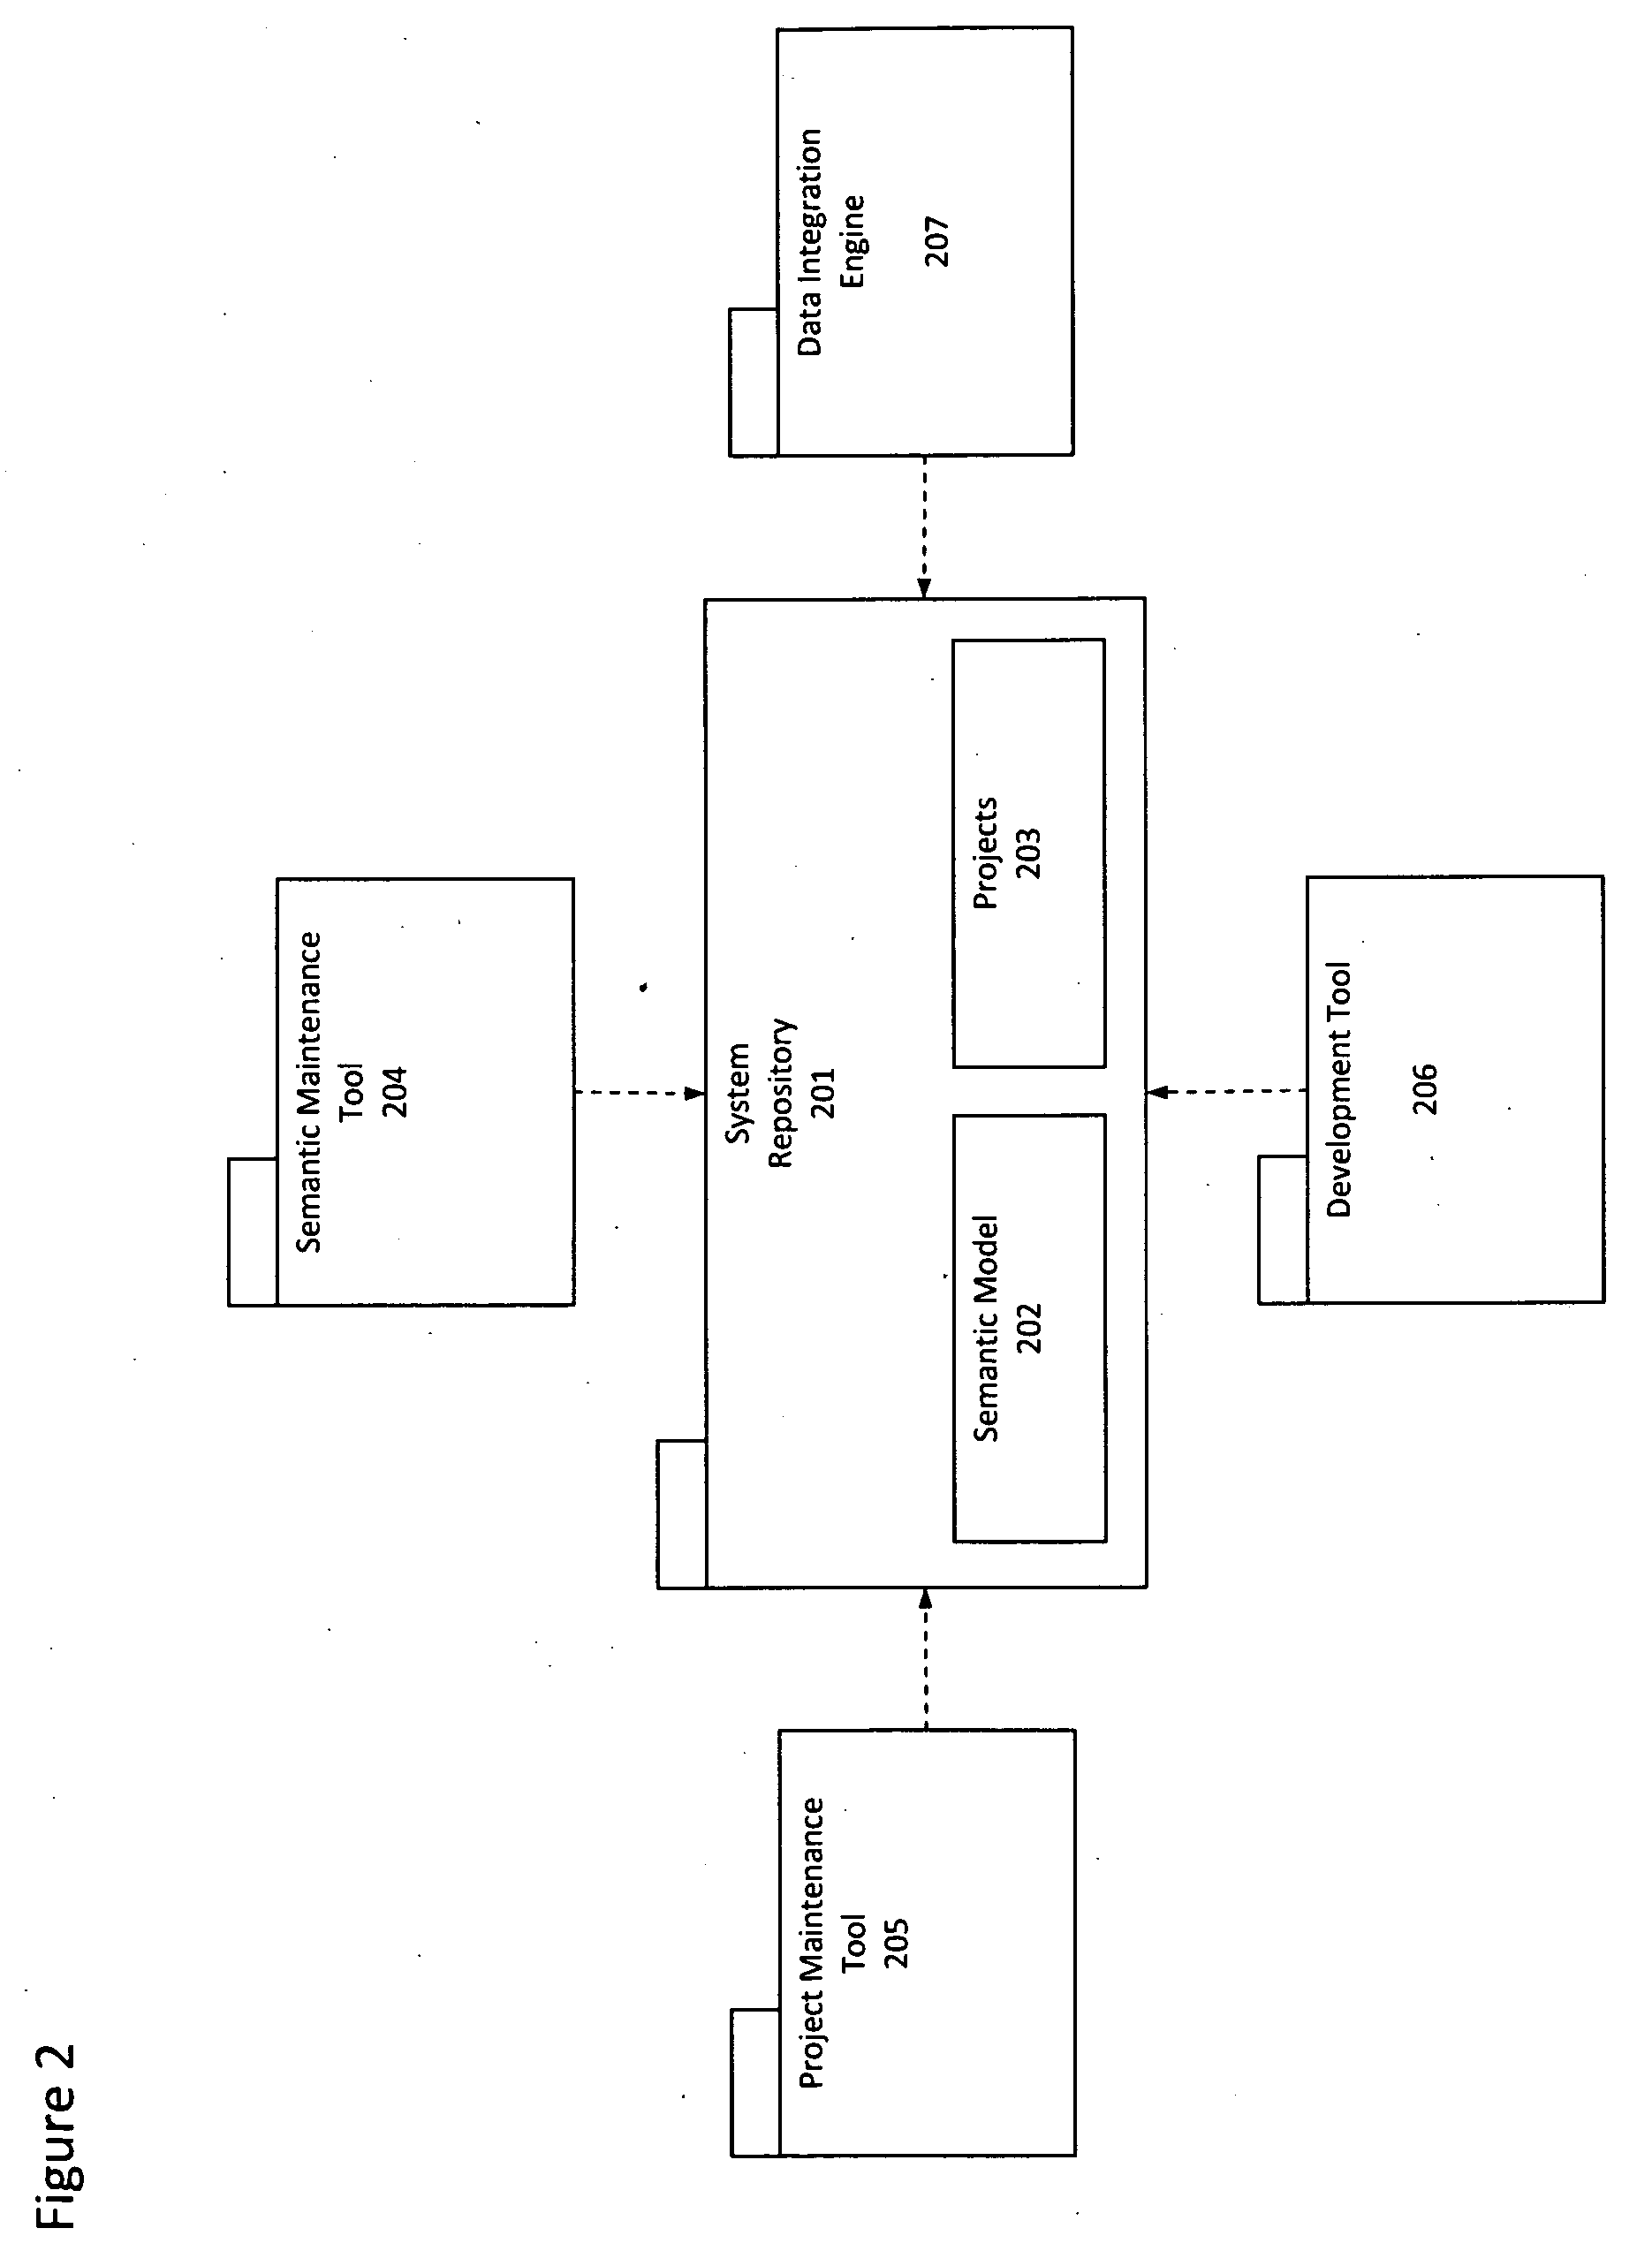 Method and system for developing data integration applications with reusable functional rules that are managed according to their output variables